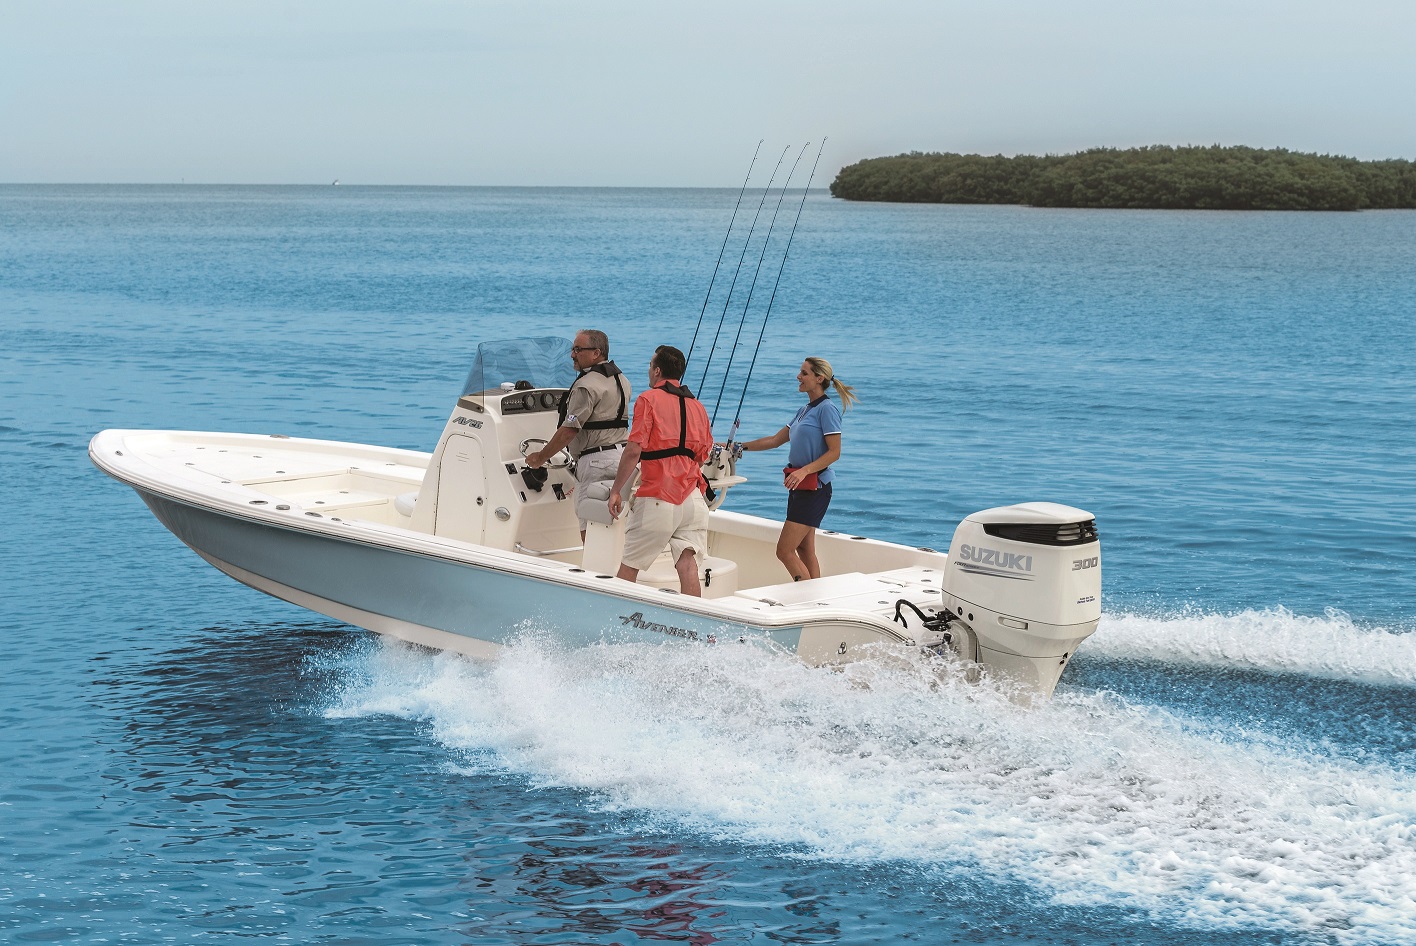 Suzuki Del Caribe will showcase the latest outboard trends for 2017 during its second annual Open House